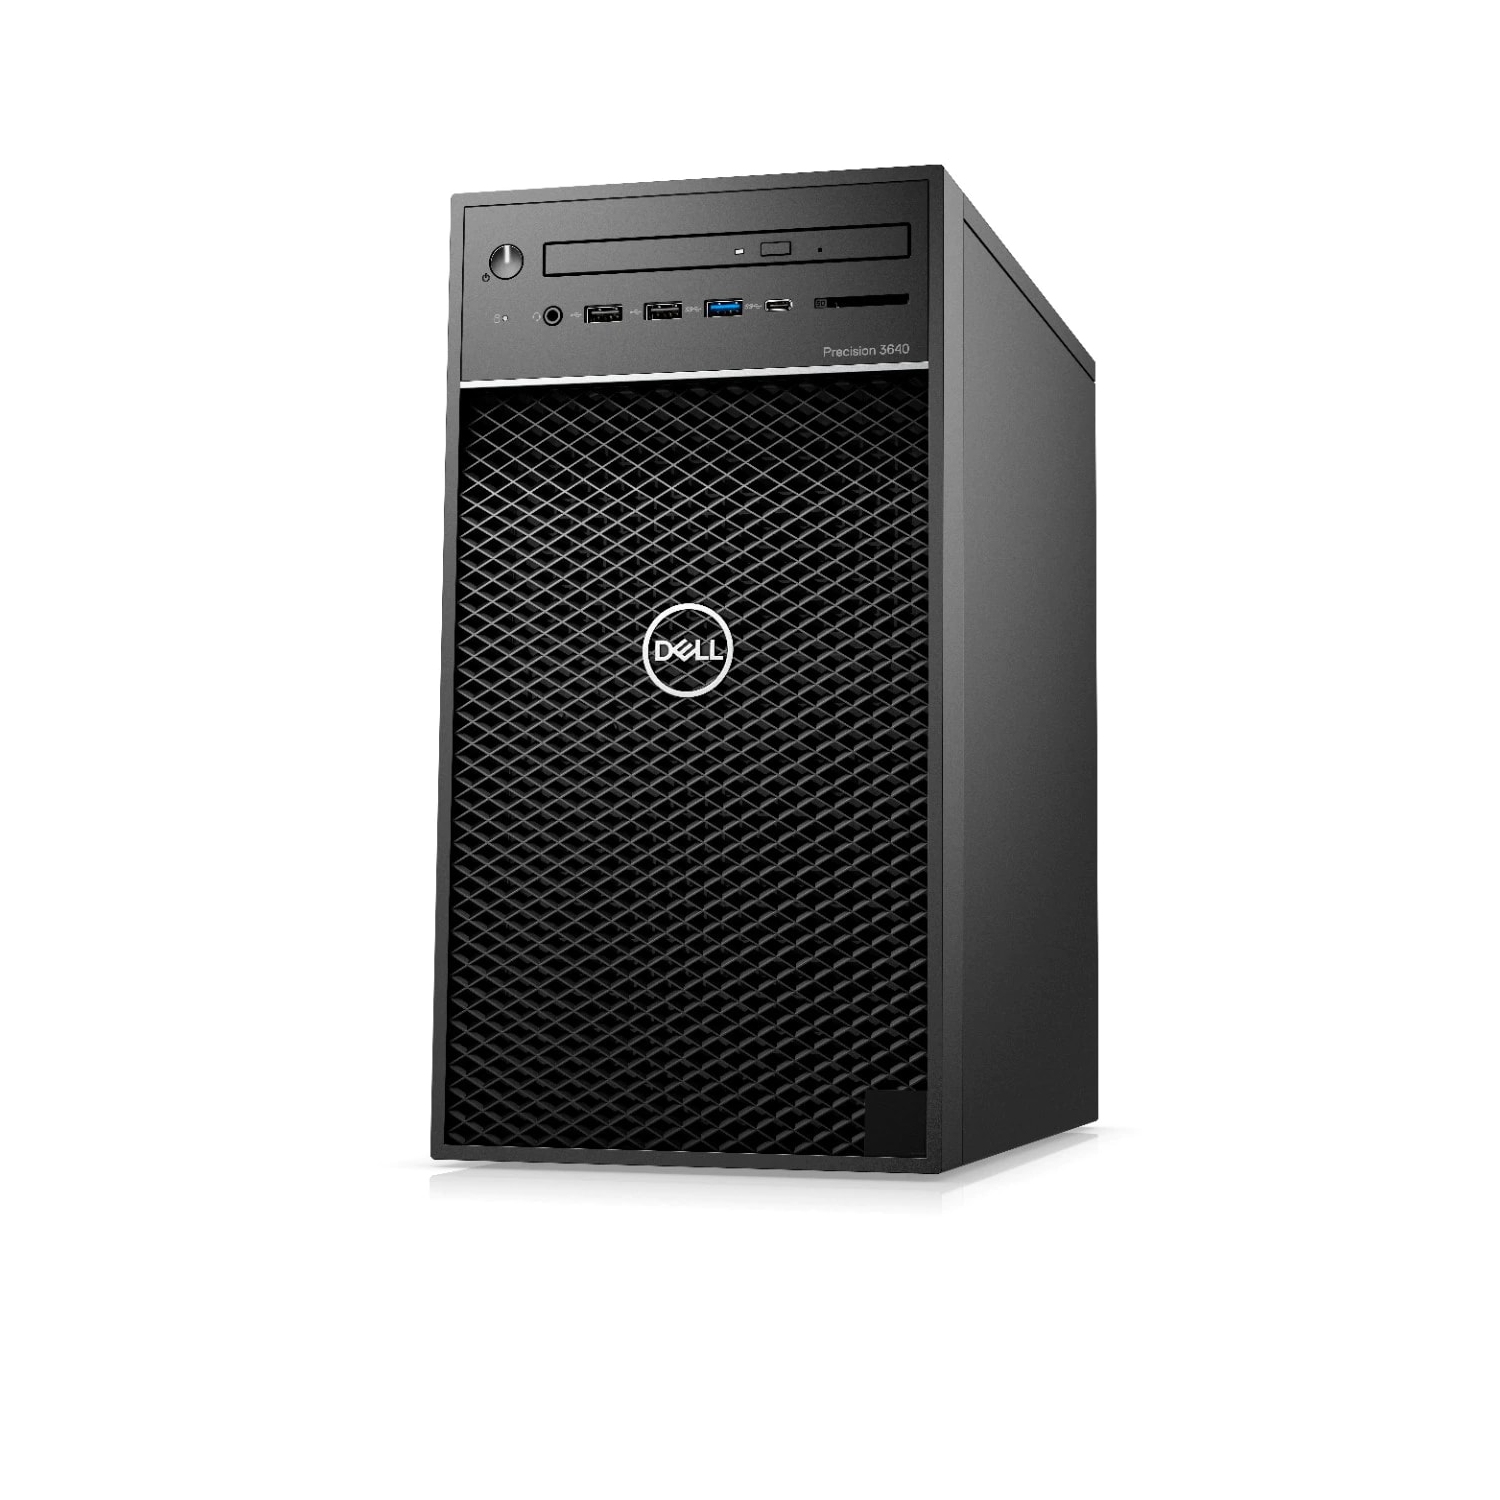 Refurbished (Excellent) - Dell Precision T3640 Workstation Desktop (2018), Core i7, 1TB SSD, 128GB RAM, RTX 3080, 8 Cores @ 5.1 GHz, 10th Gen CPU Certified Refurbished